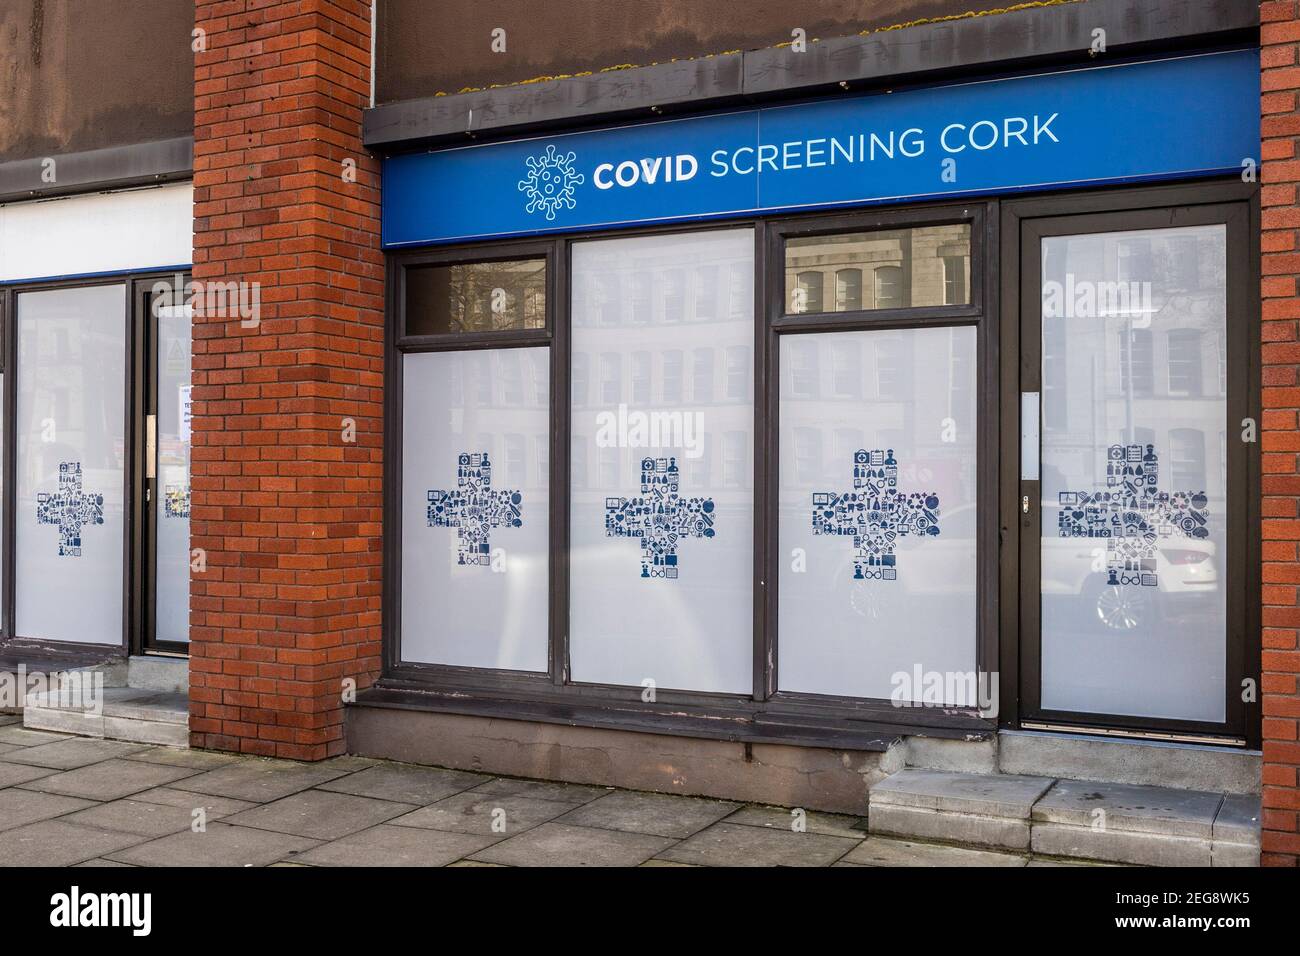 Cork, Ireland. 18th Feb, 2021. People in Cork city centre go about their business during the government's level 5 lockdown. This Covid Screening Centre was open and testing people. Credit: AG News/Alamy Live News Stock Photo